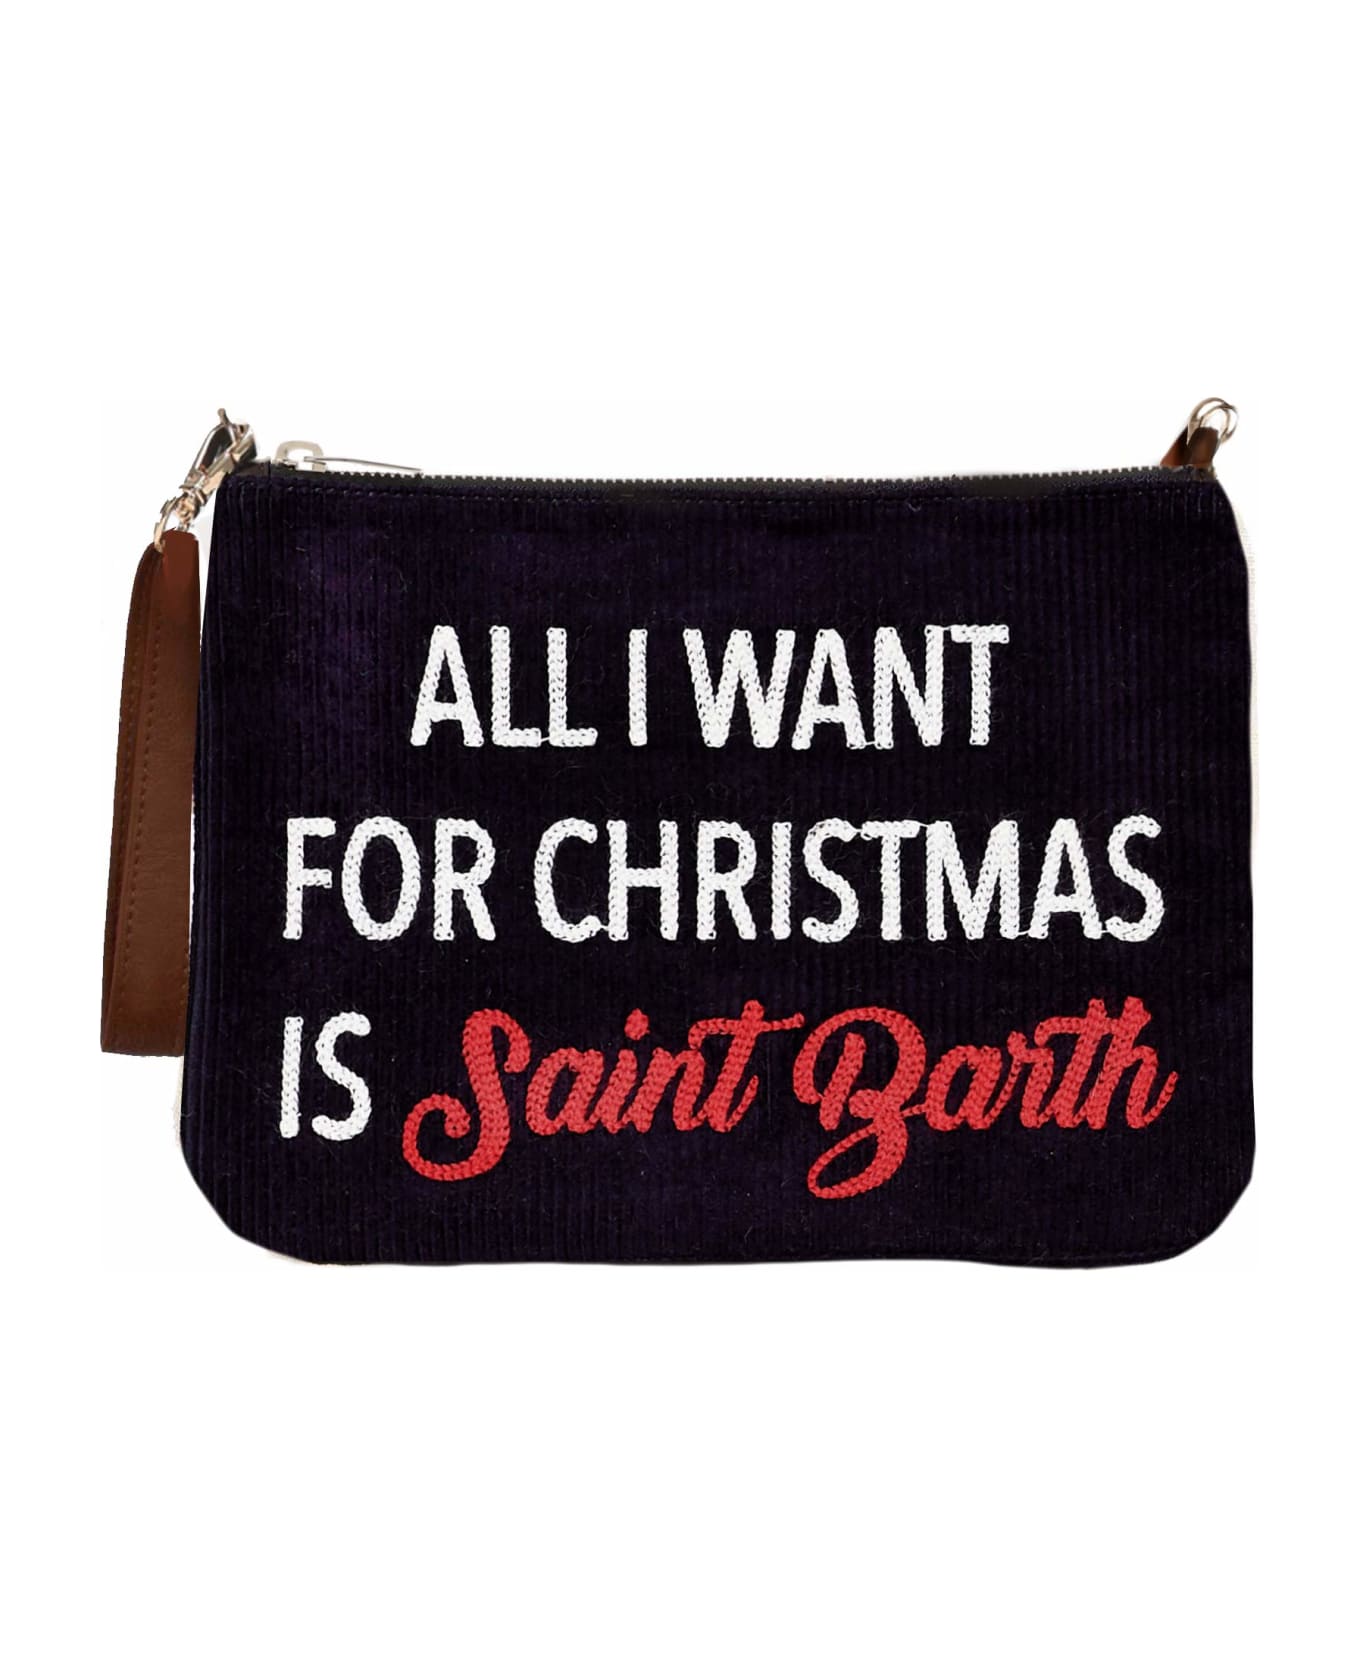 MC2 Saint Barth Parisienne Velvet Cross-body Pouch Bag With All I Want For Christmas Is Saint Barth Embroidery - BLUE